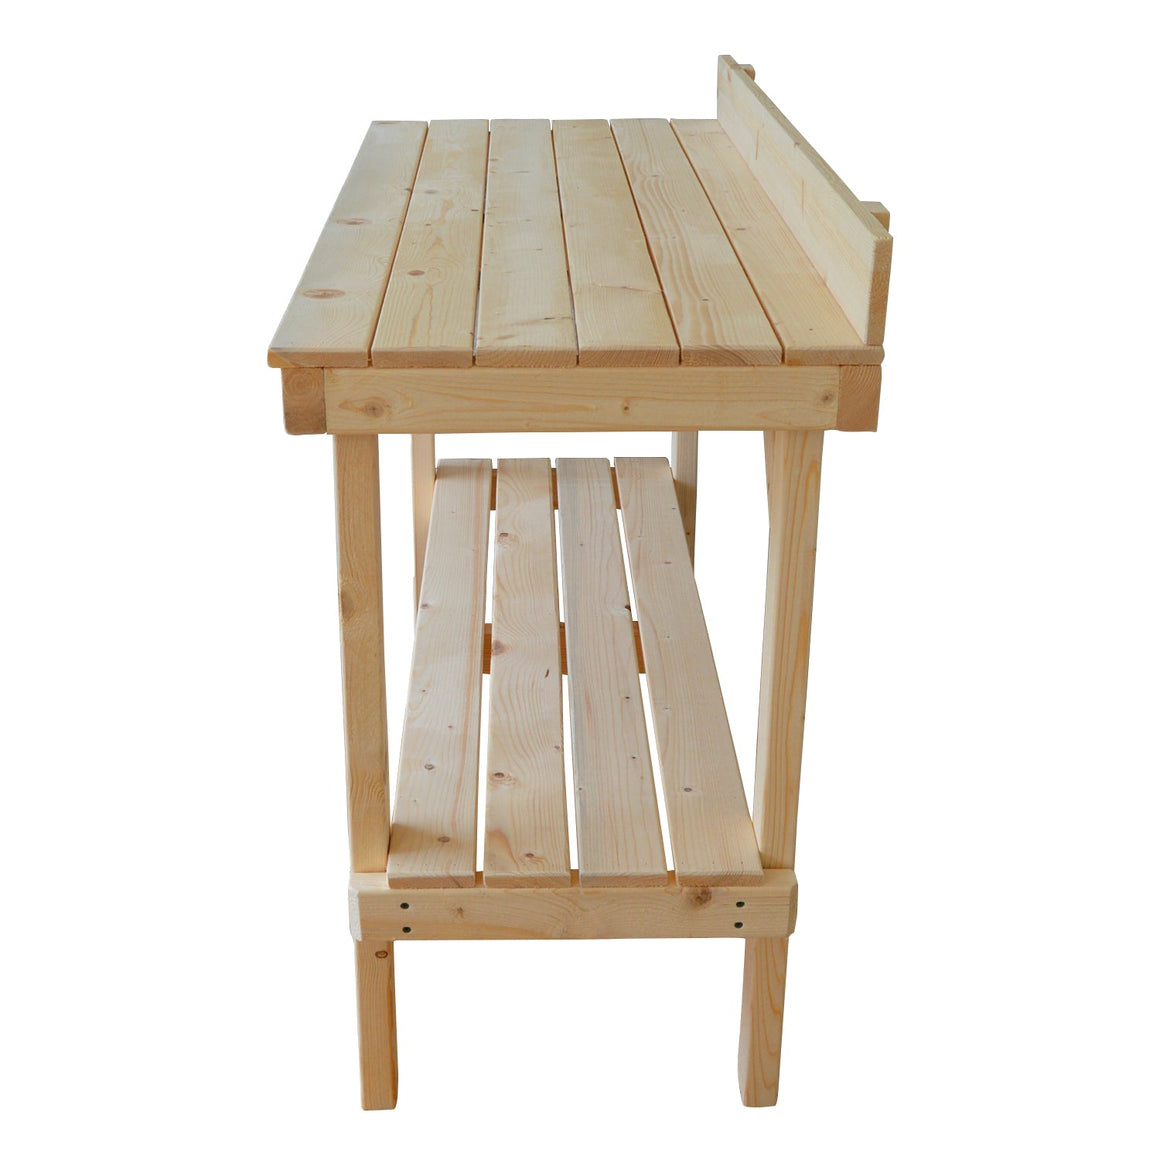 quality pine garden table